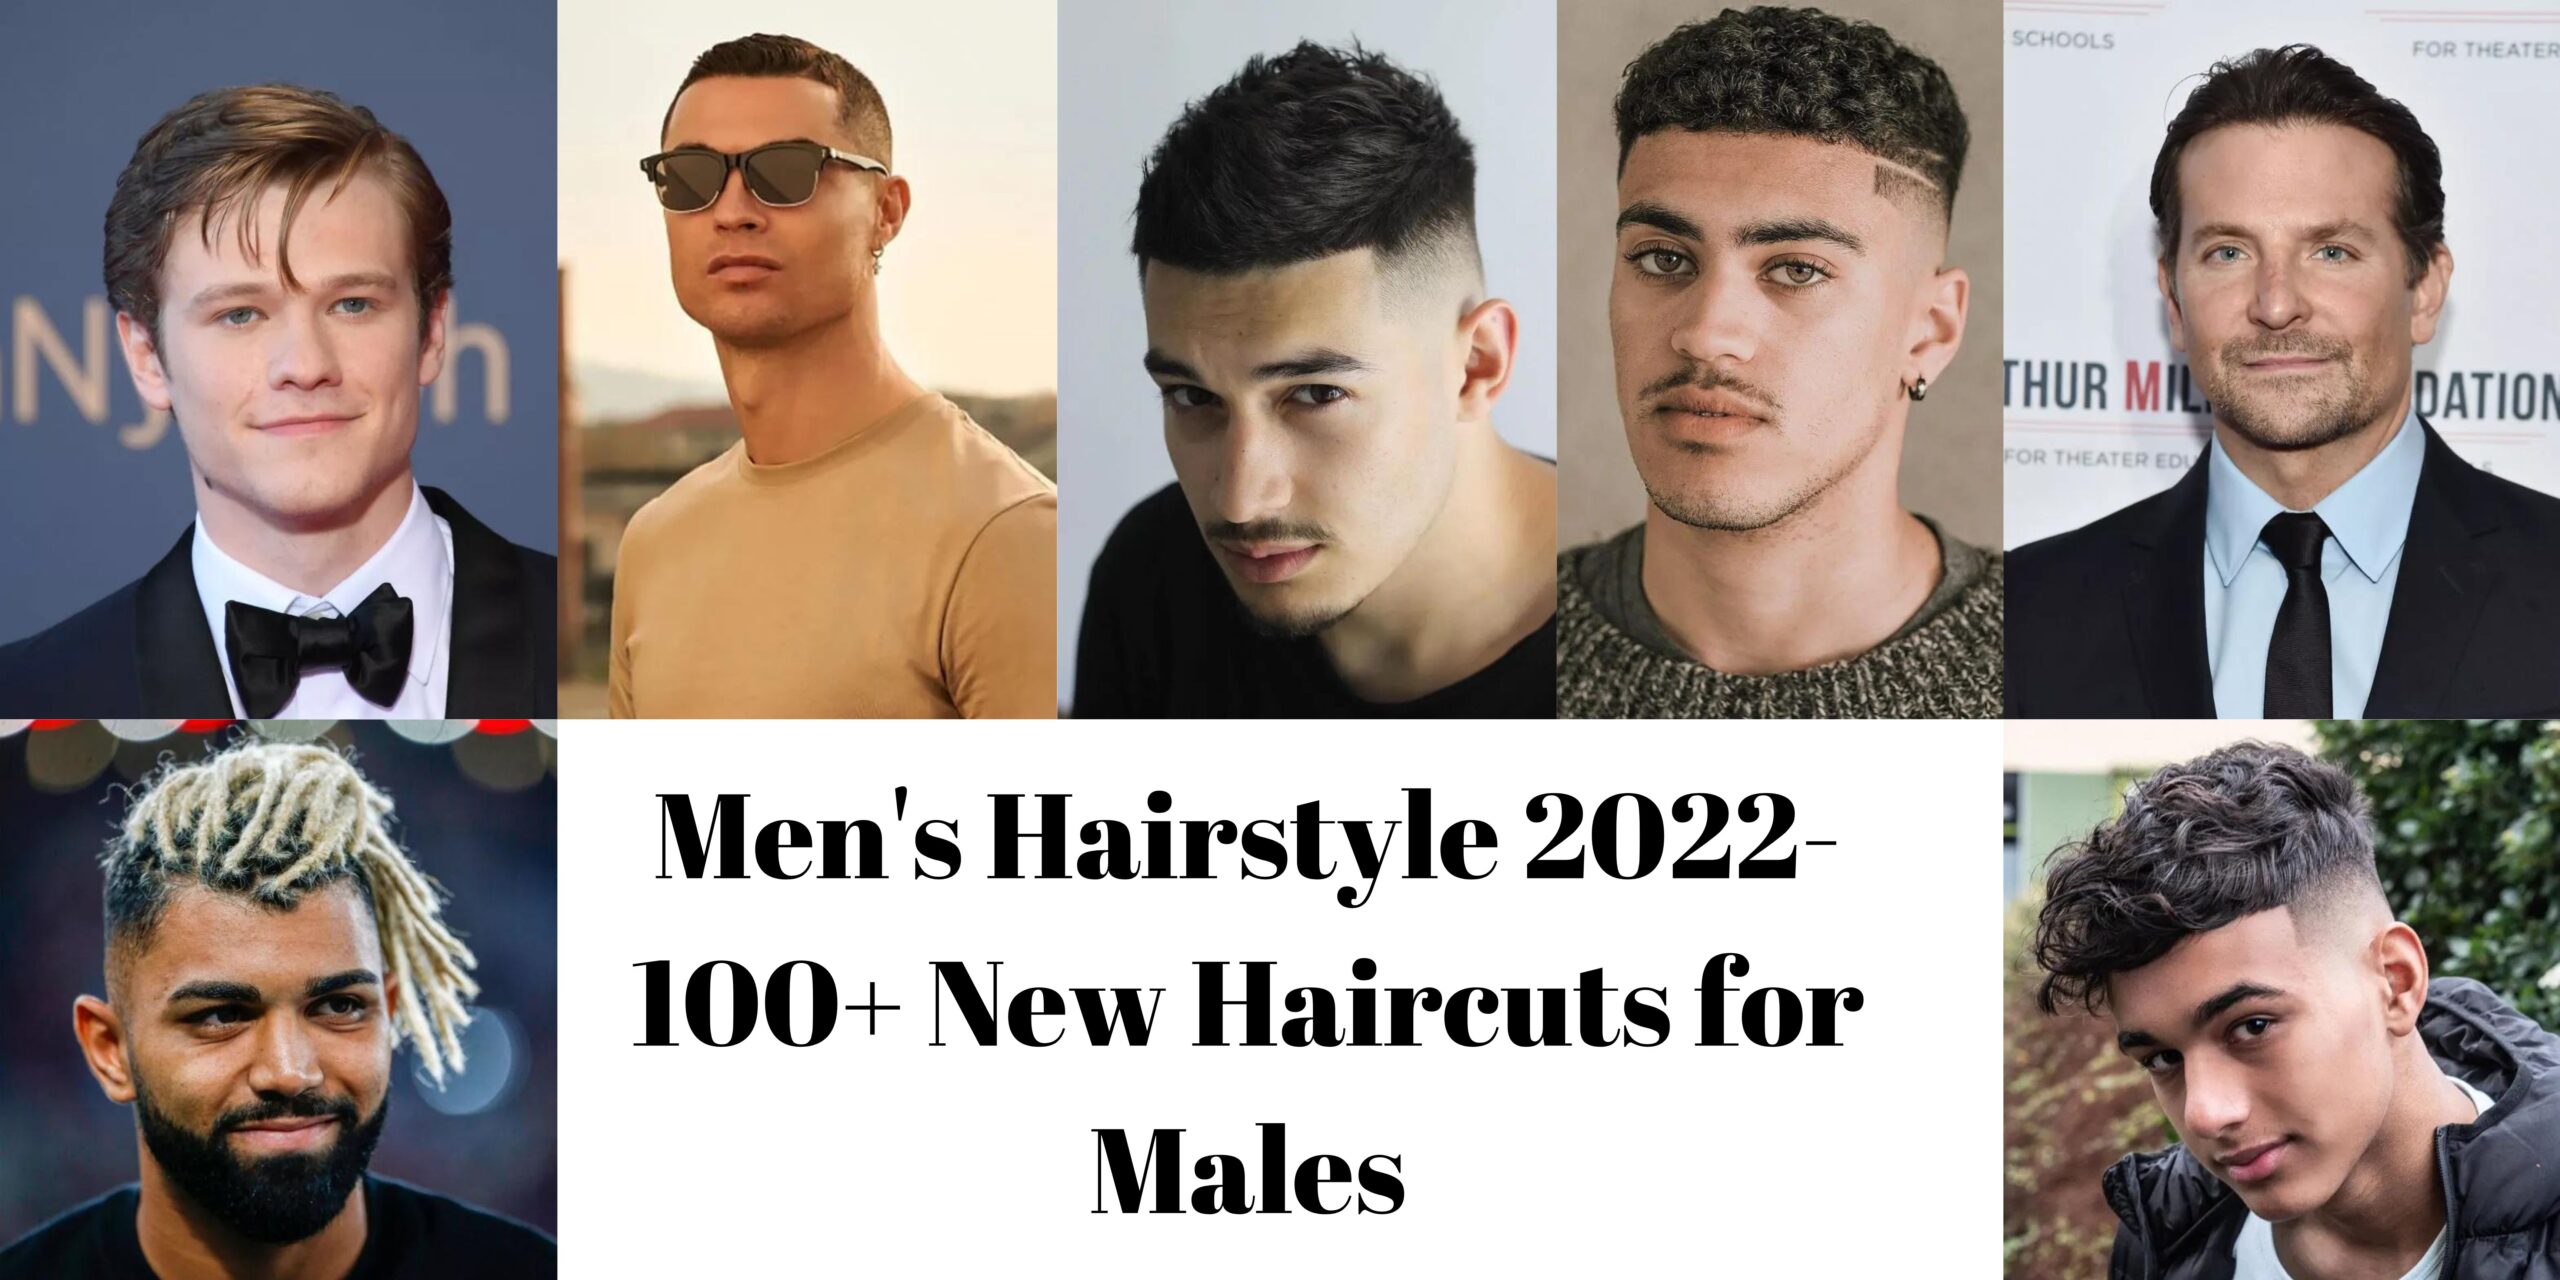 Men's Hairstyle 2022- 100+ New Haircuts for Males 1